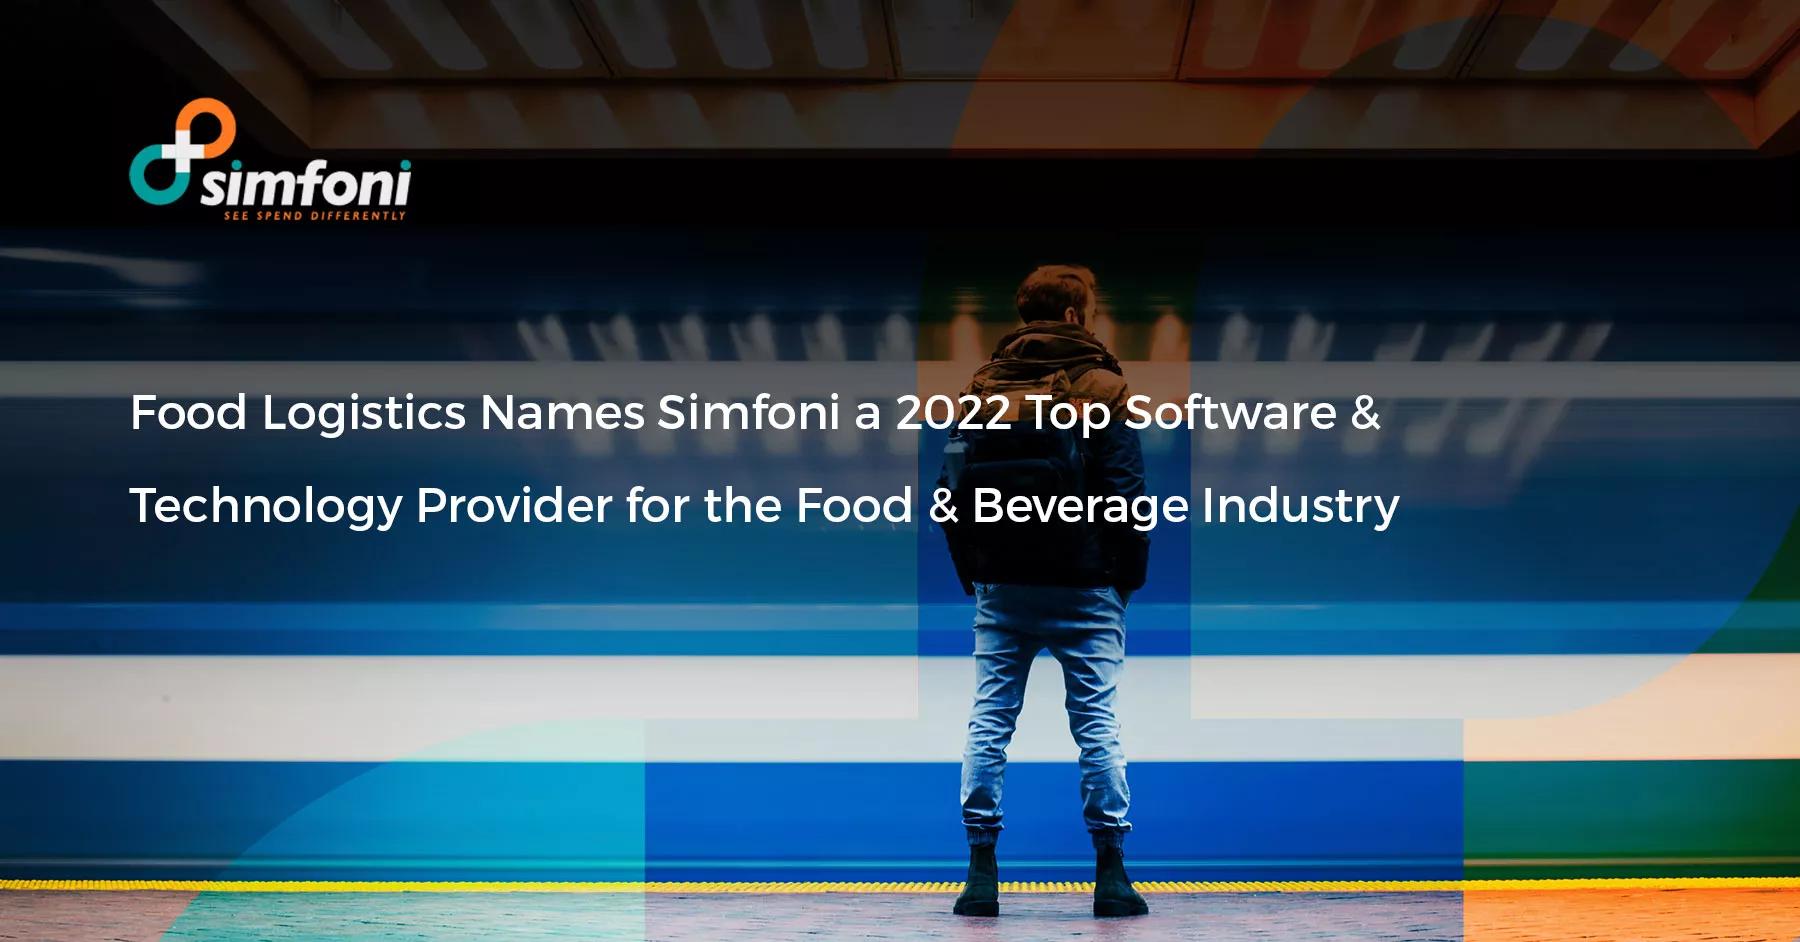 Food Logistics Names Simfoni a 2022 Top Software & Technology Provider for the Food & Beverage Industry